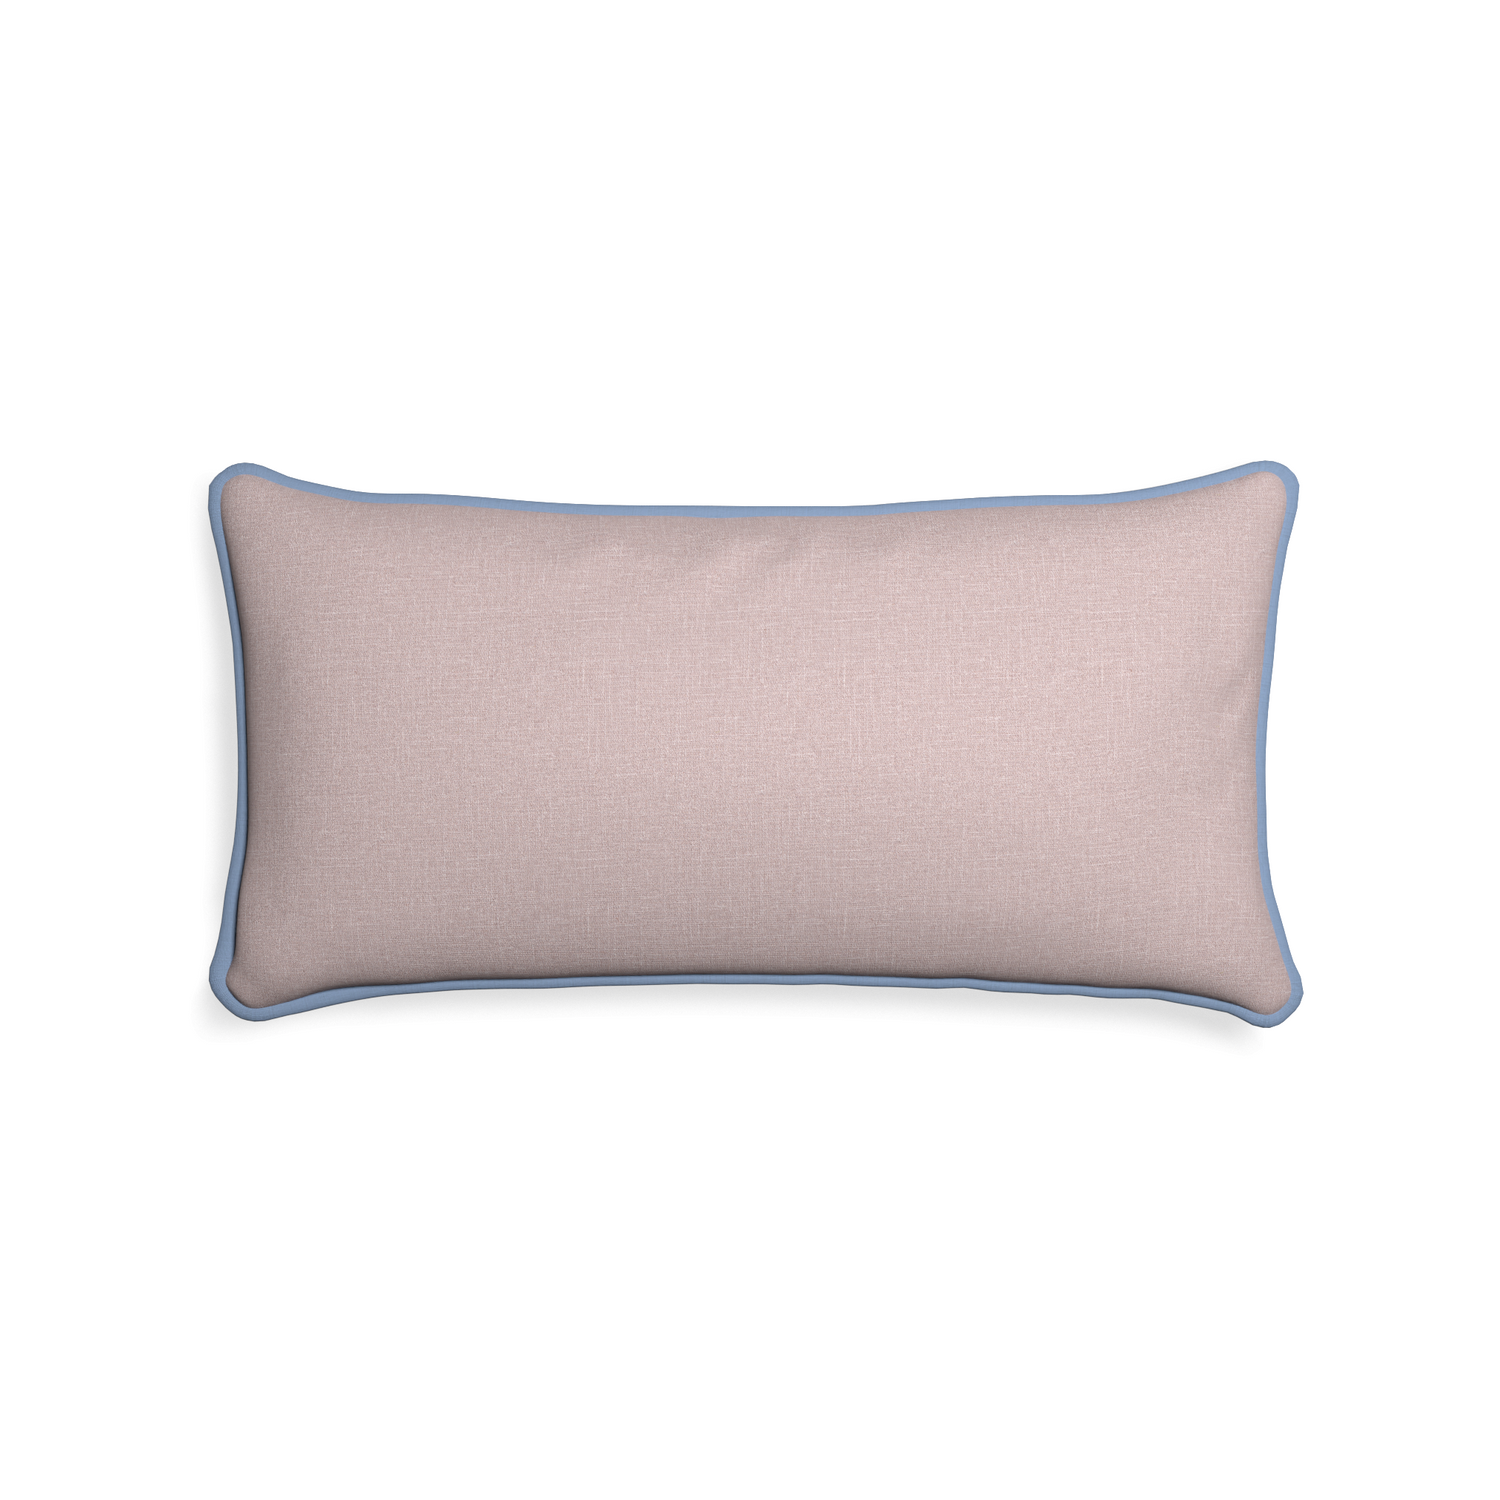 Midi-lumbar orchid custom mauve pinkpillow with sky piping on white background